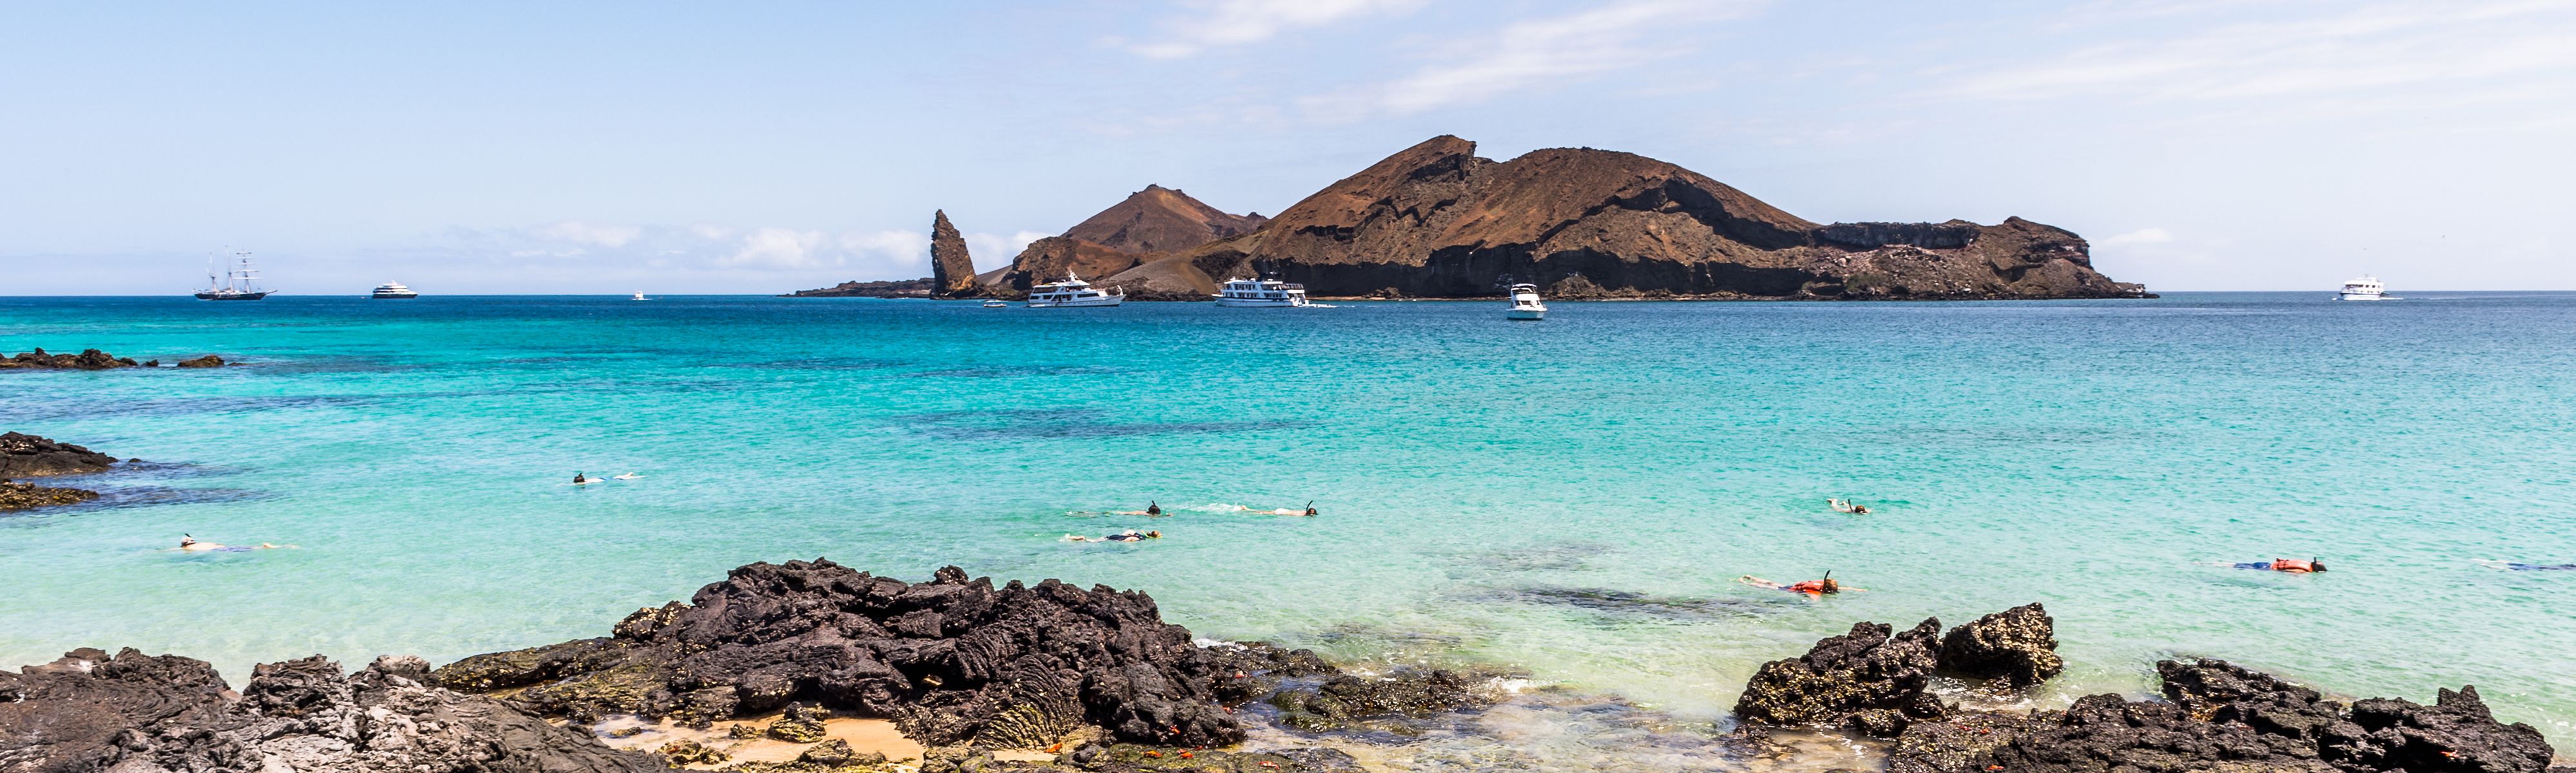 people snorkeling along the coast of the galapagos islands